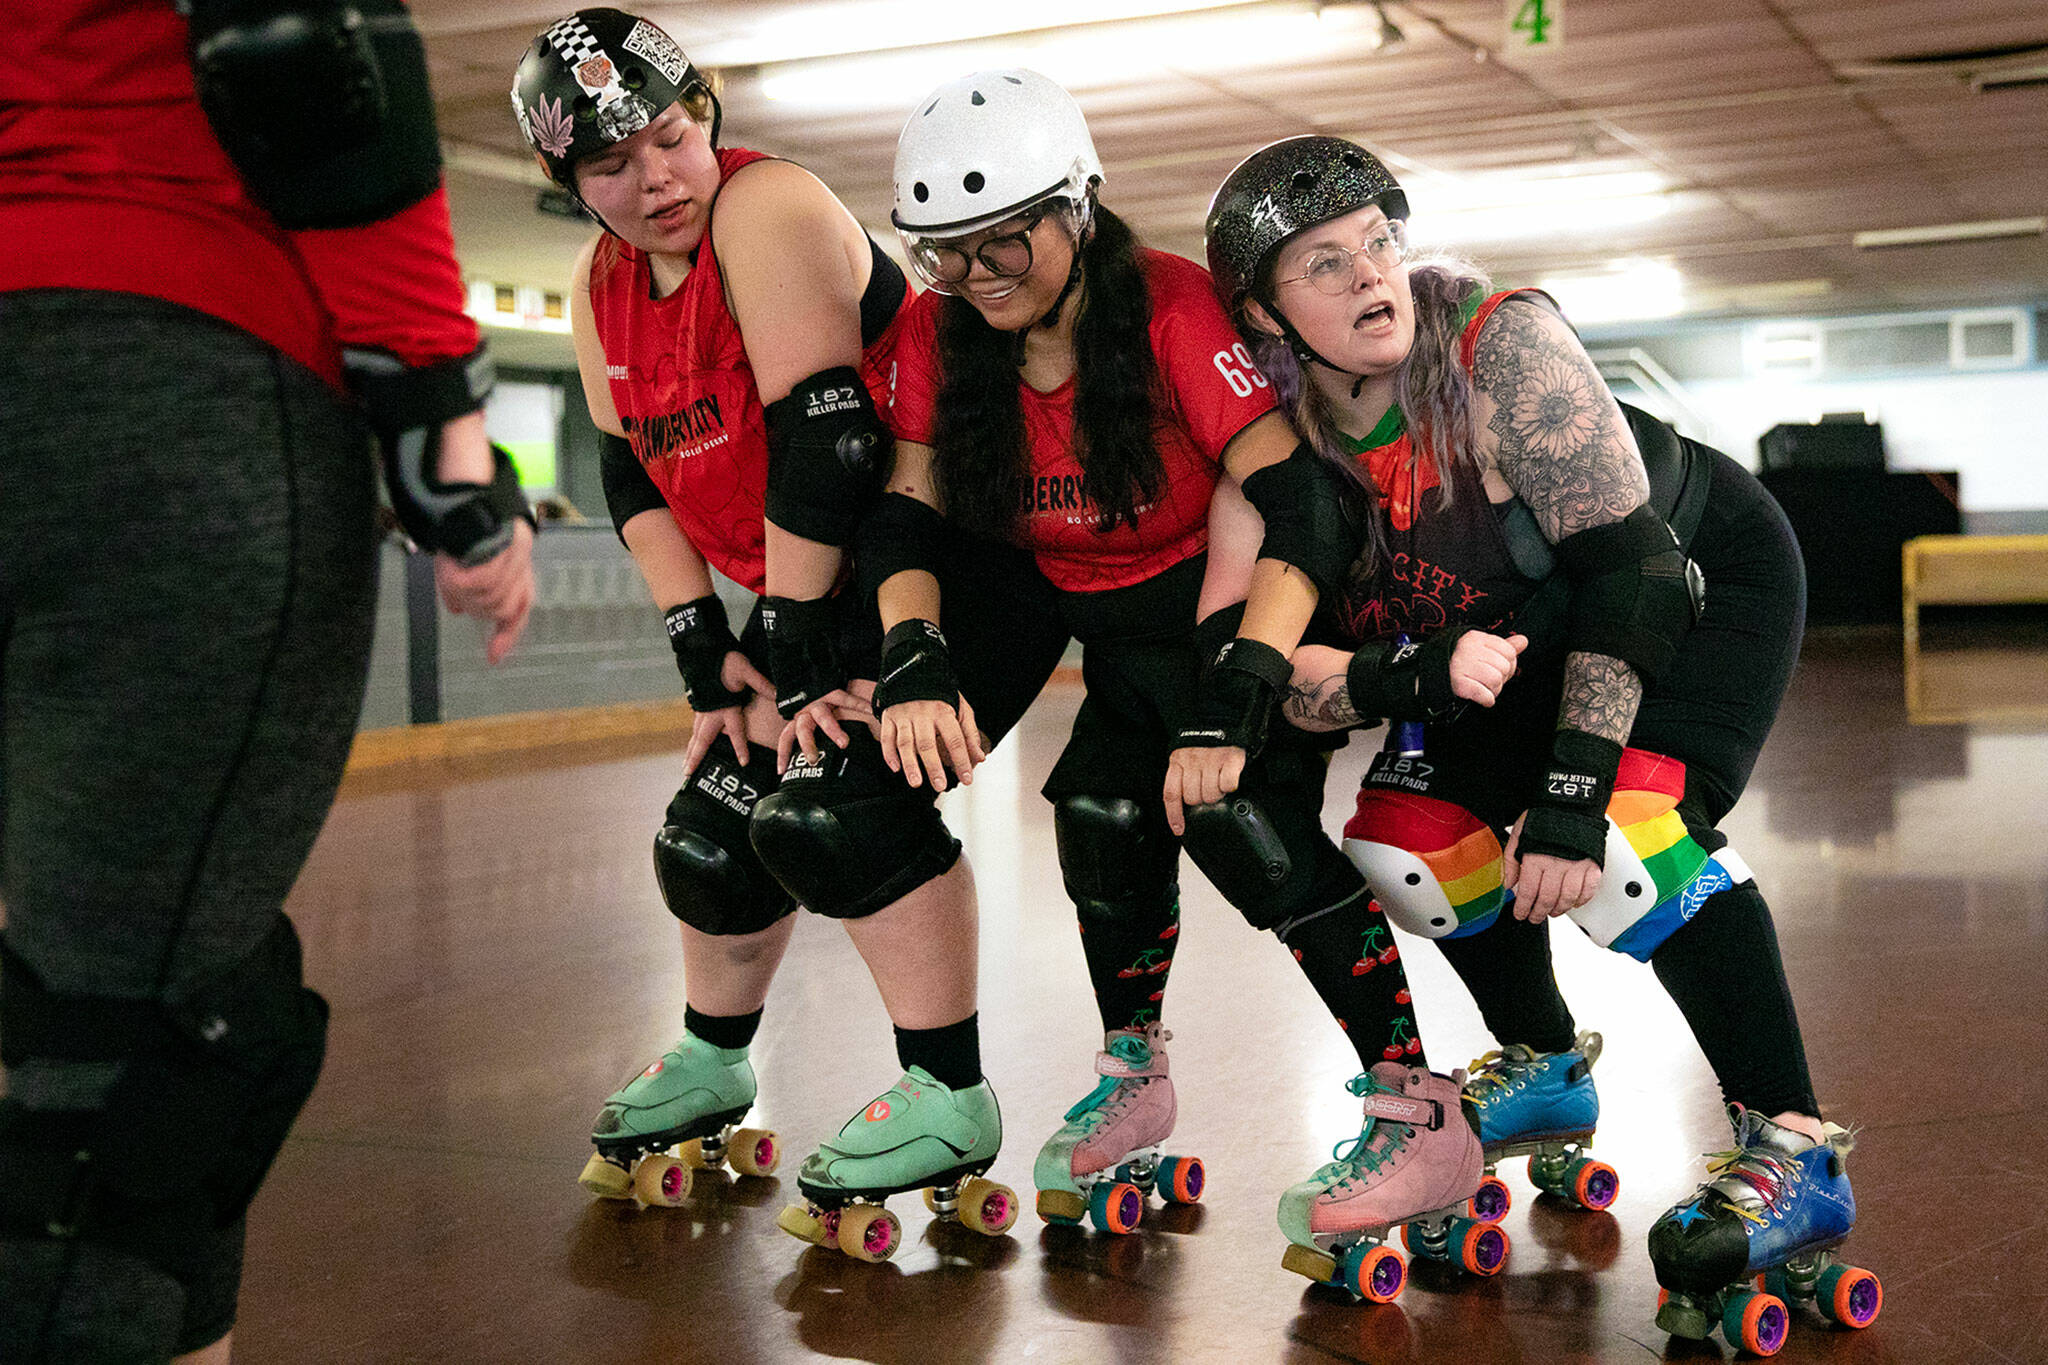 Calling all 'straw-babies': Marysville roller derby outgrows its patch |  HeraldNet.com